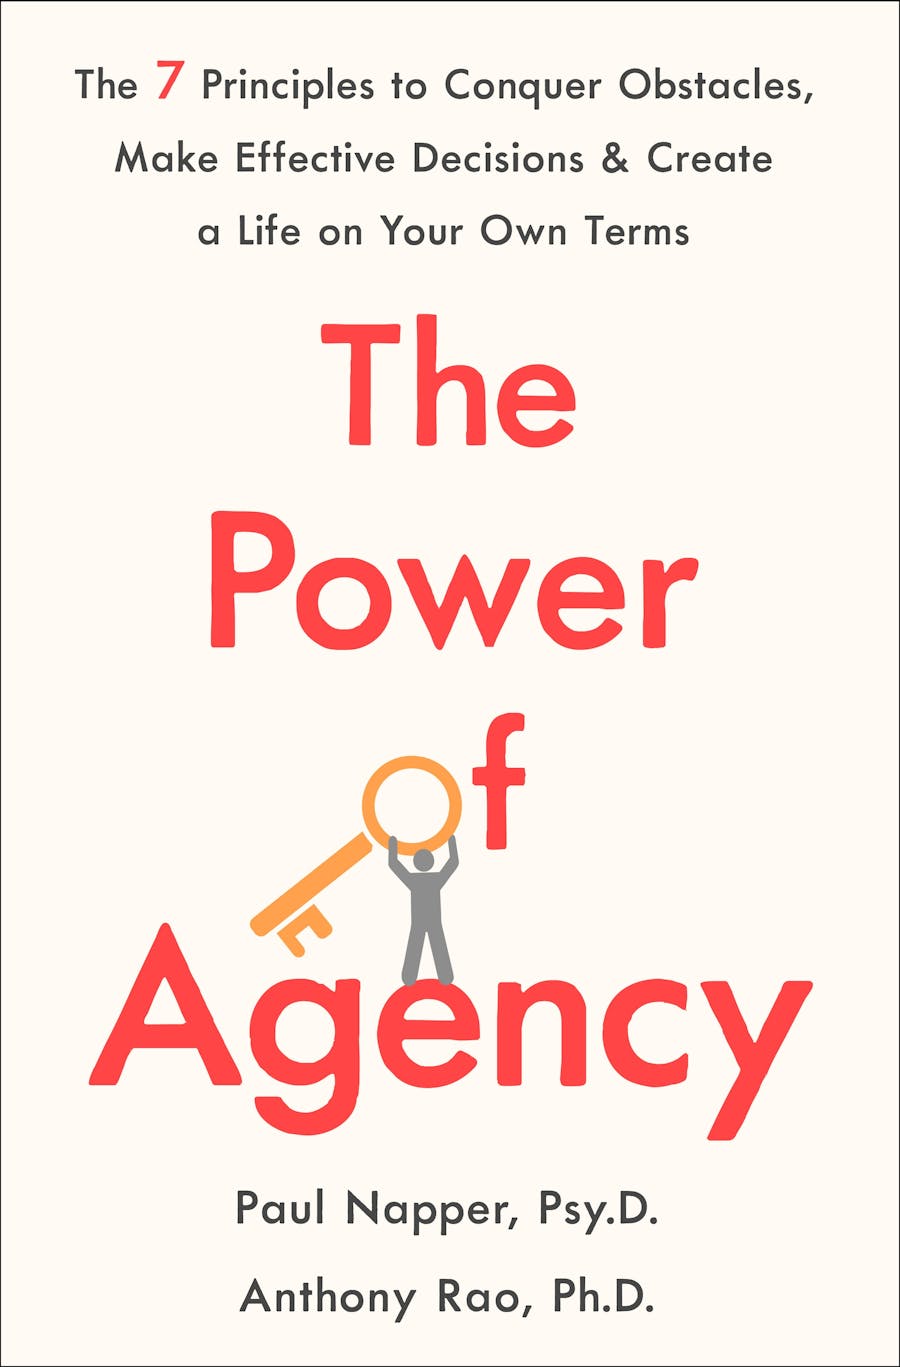 The Power of Agency by Paul Napper, PsyD and Anthony Rao, PhD